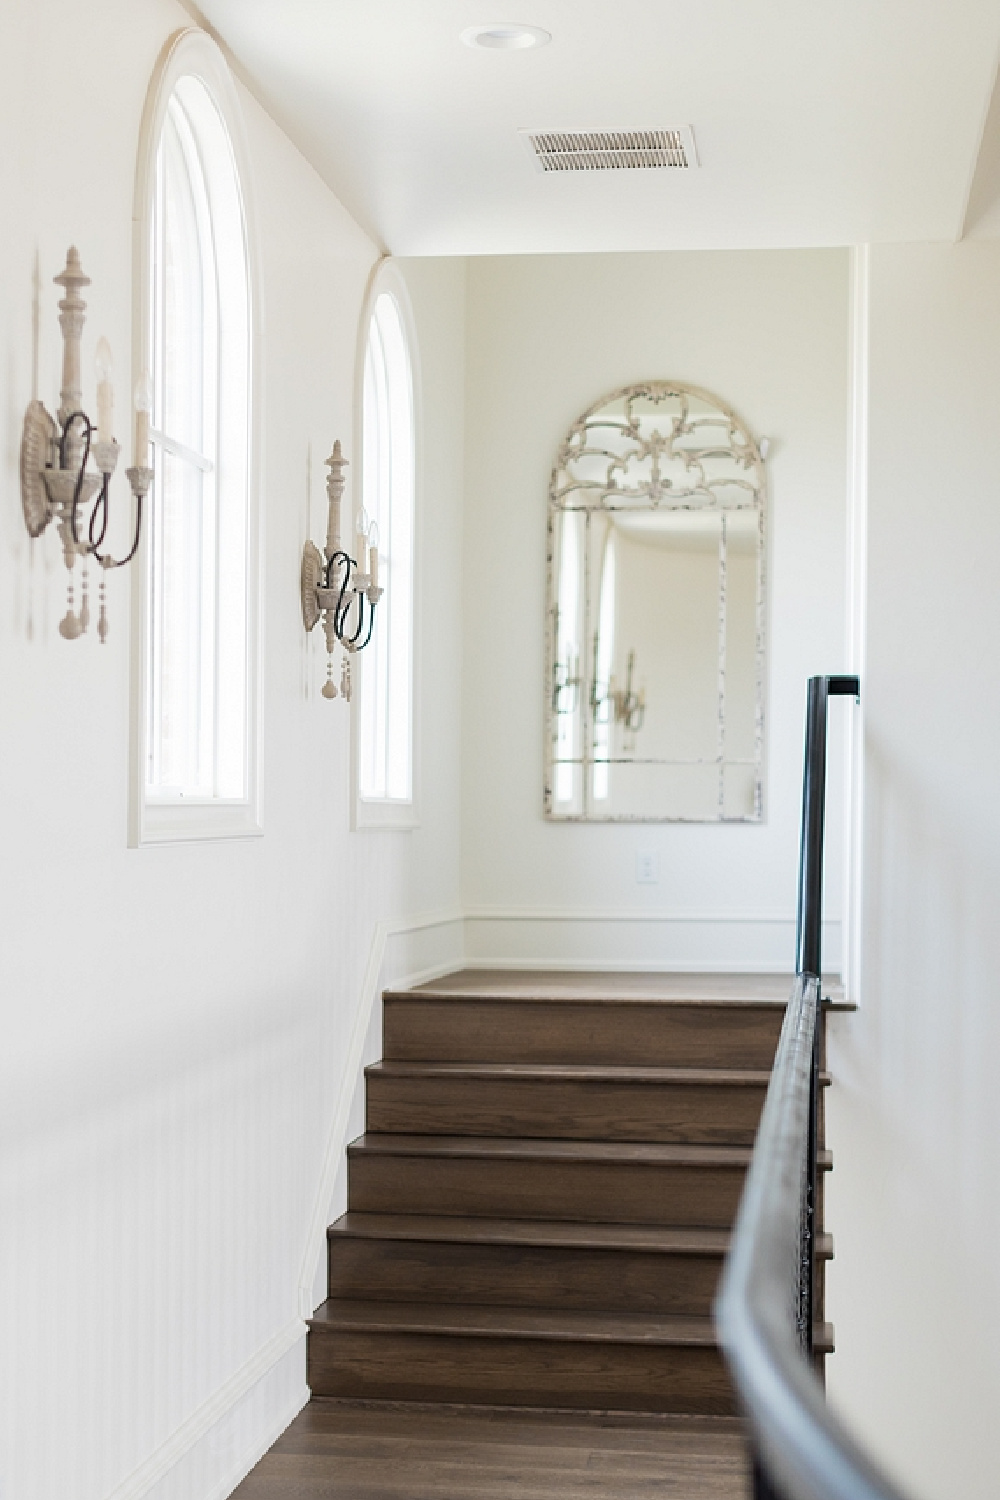 French country sconces and arched mirror in a stairway - Brit Jones.